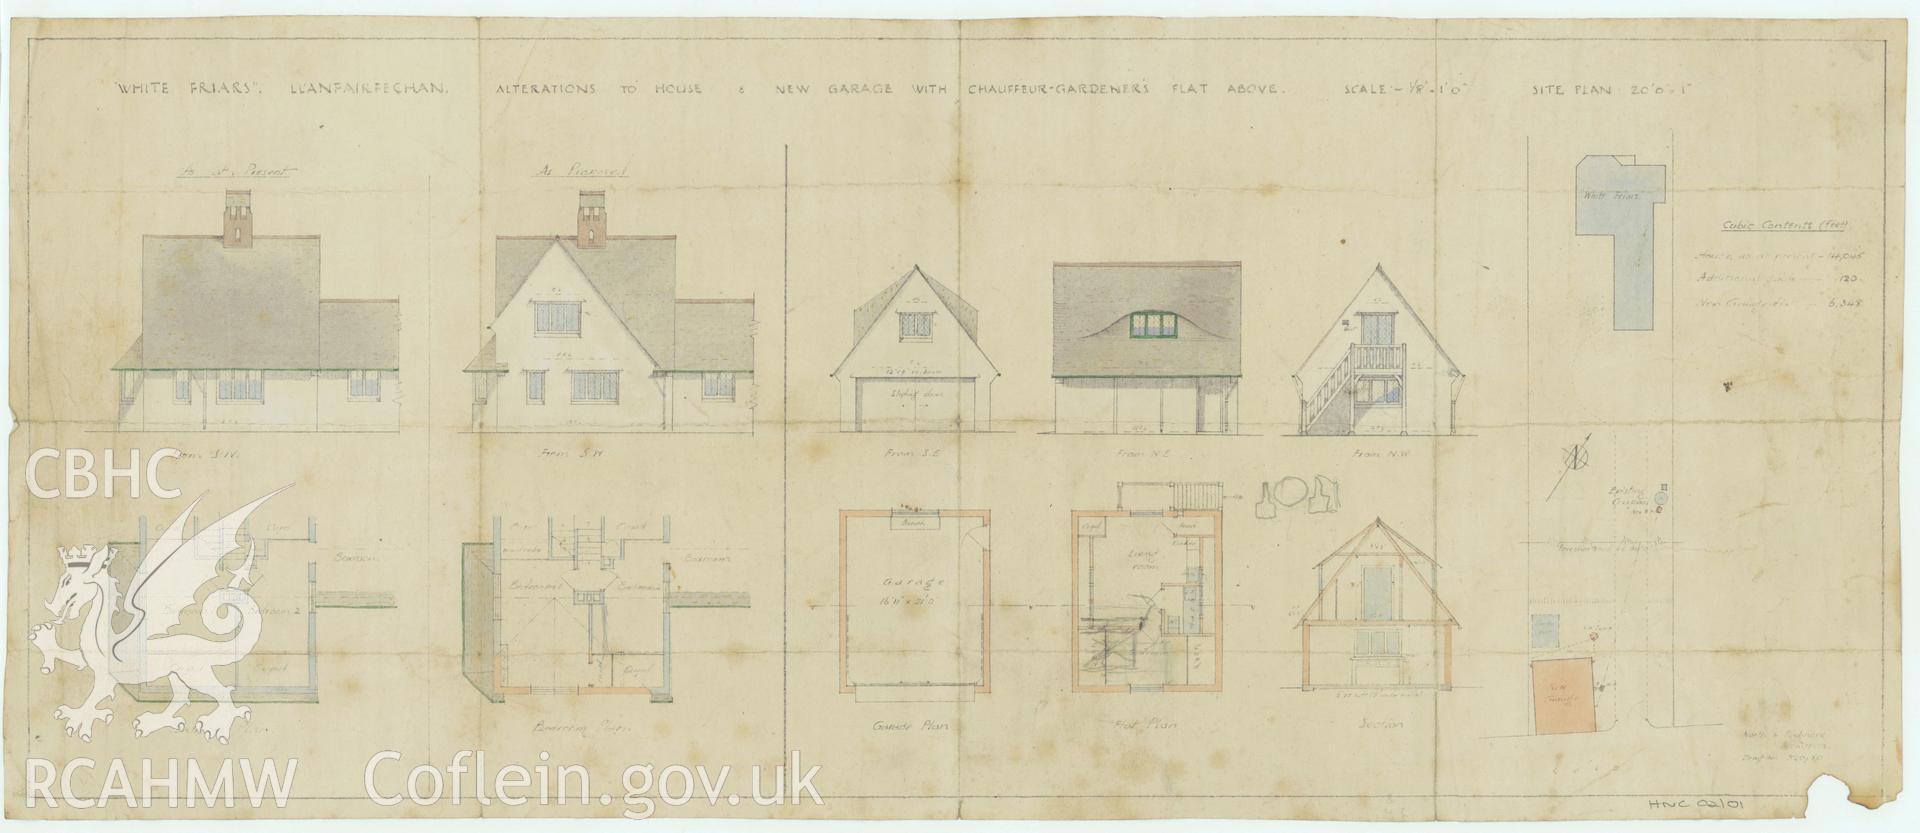 Plans and elevations relating to Whitefriars, West Shore, Llanfairfechan, Conwy: New Garage with Chauffeur-Gardener's Fla. Above.